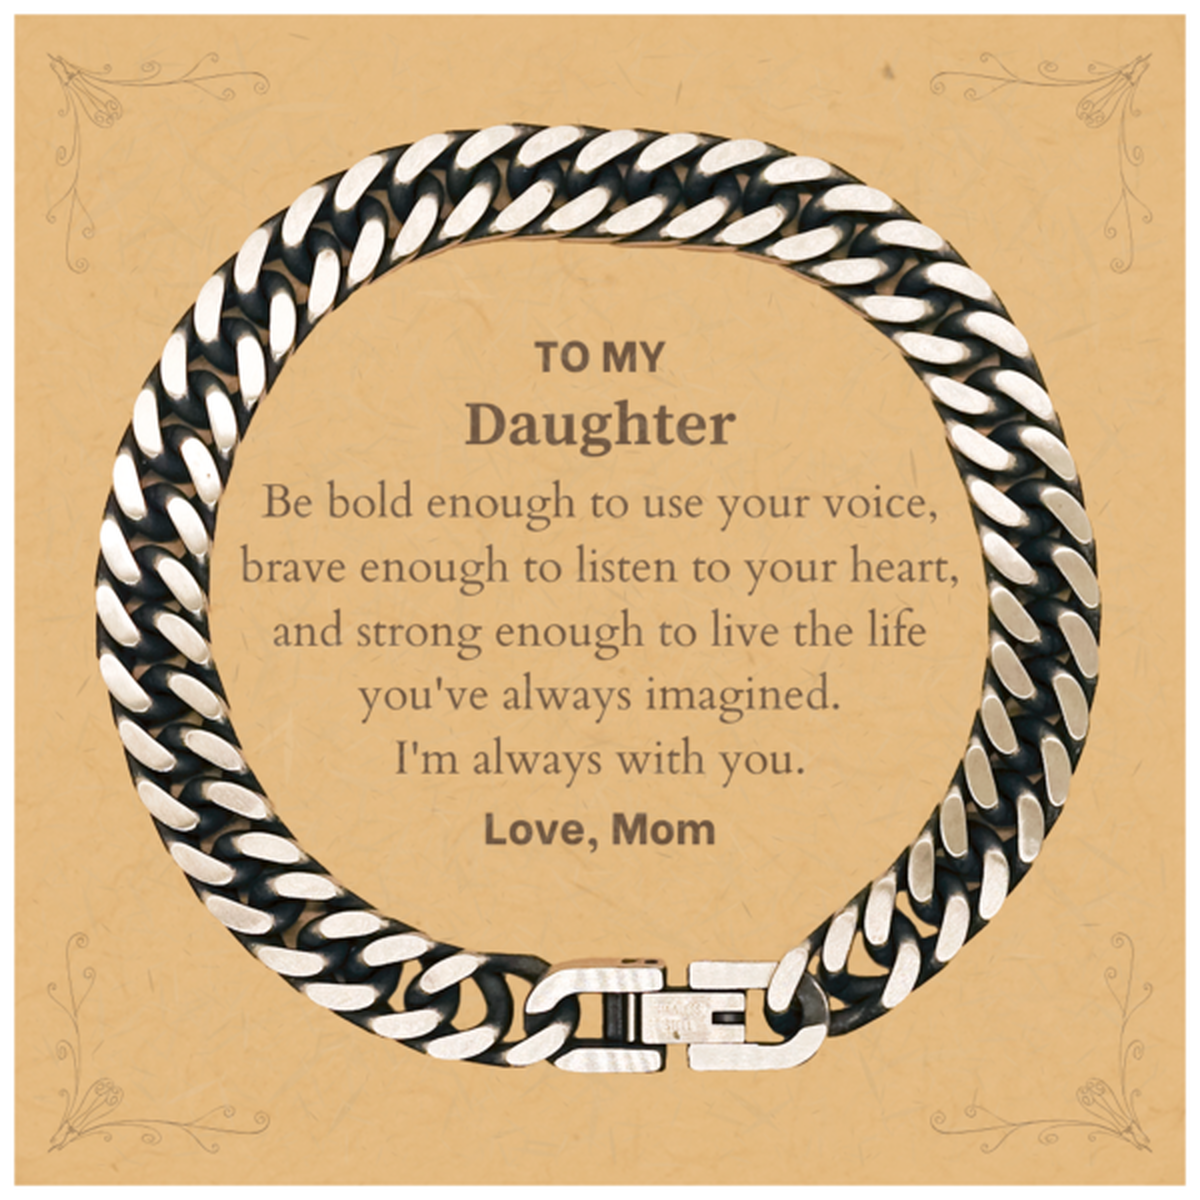 Keepsake Daughter Cuban Link Chain Bracelet Gift Idea Graduation Christmas Birthday Daughter from Mom, Daughter Be bold enough to use your voice, brave enough to listen to your heart. Love, Mom